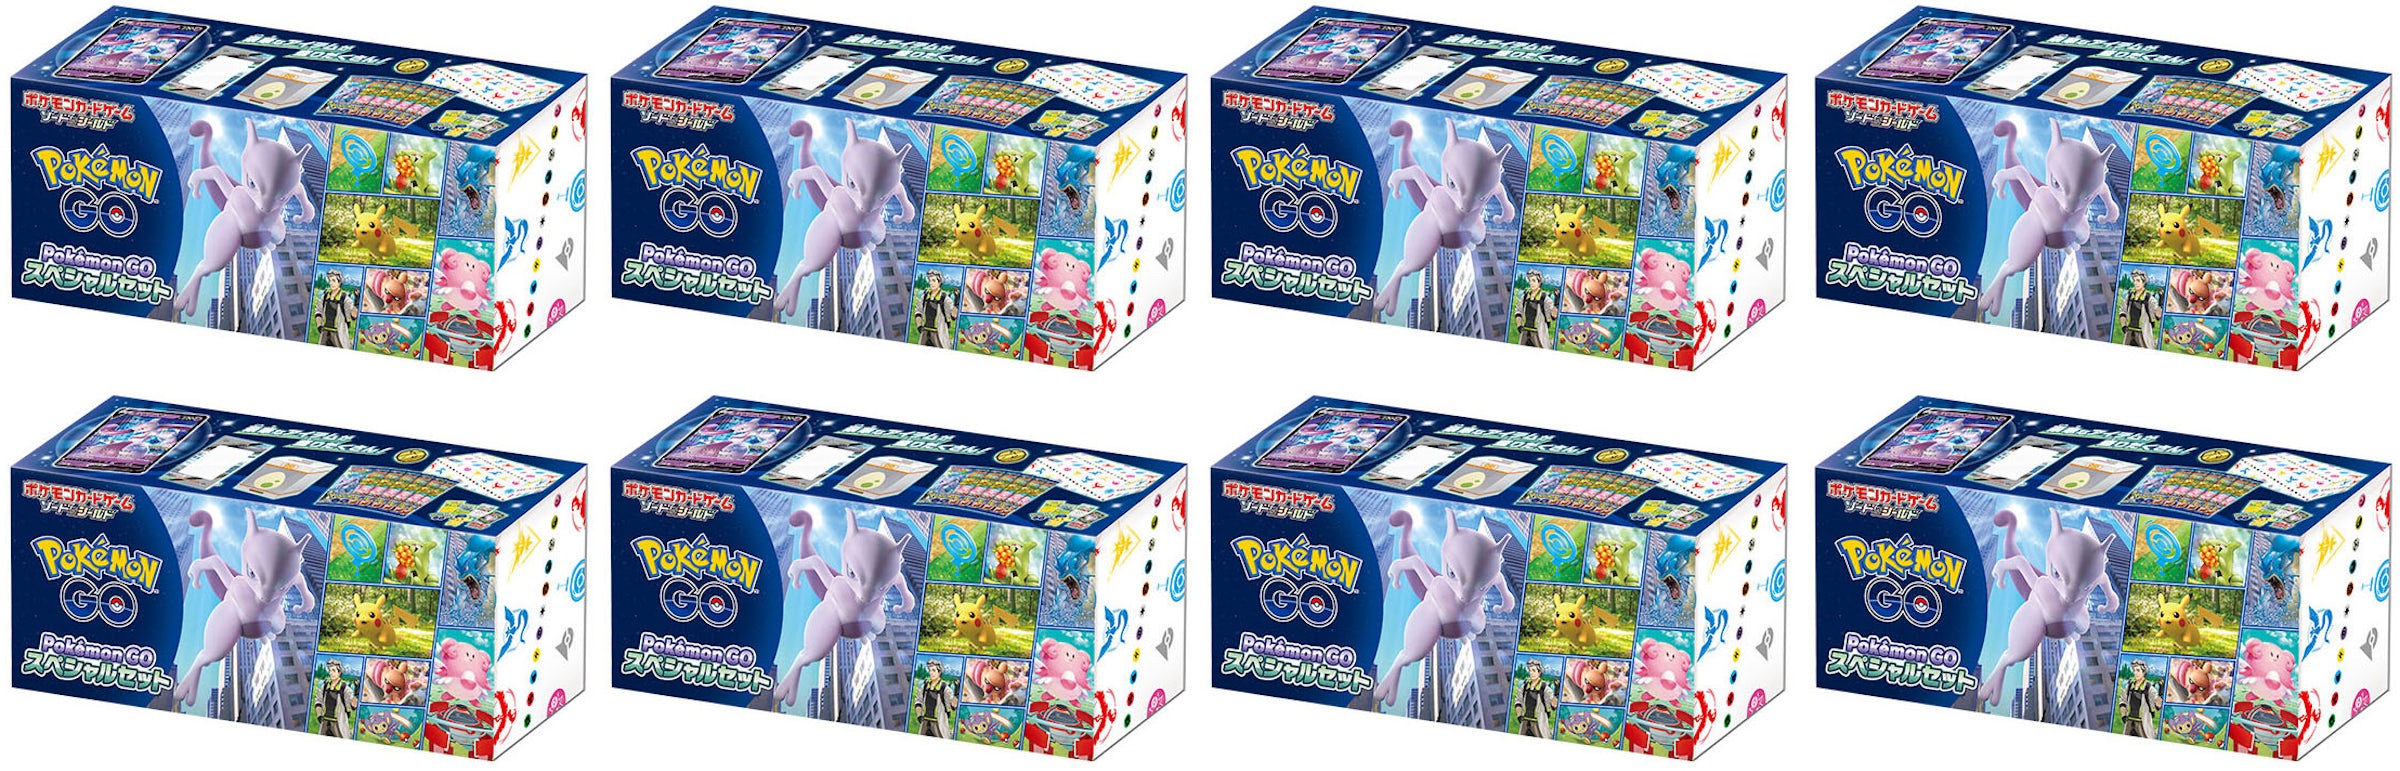 Pokemon Cards Only Released In Japan